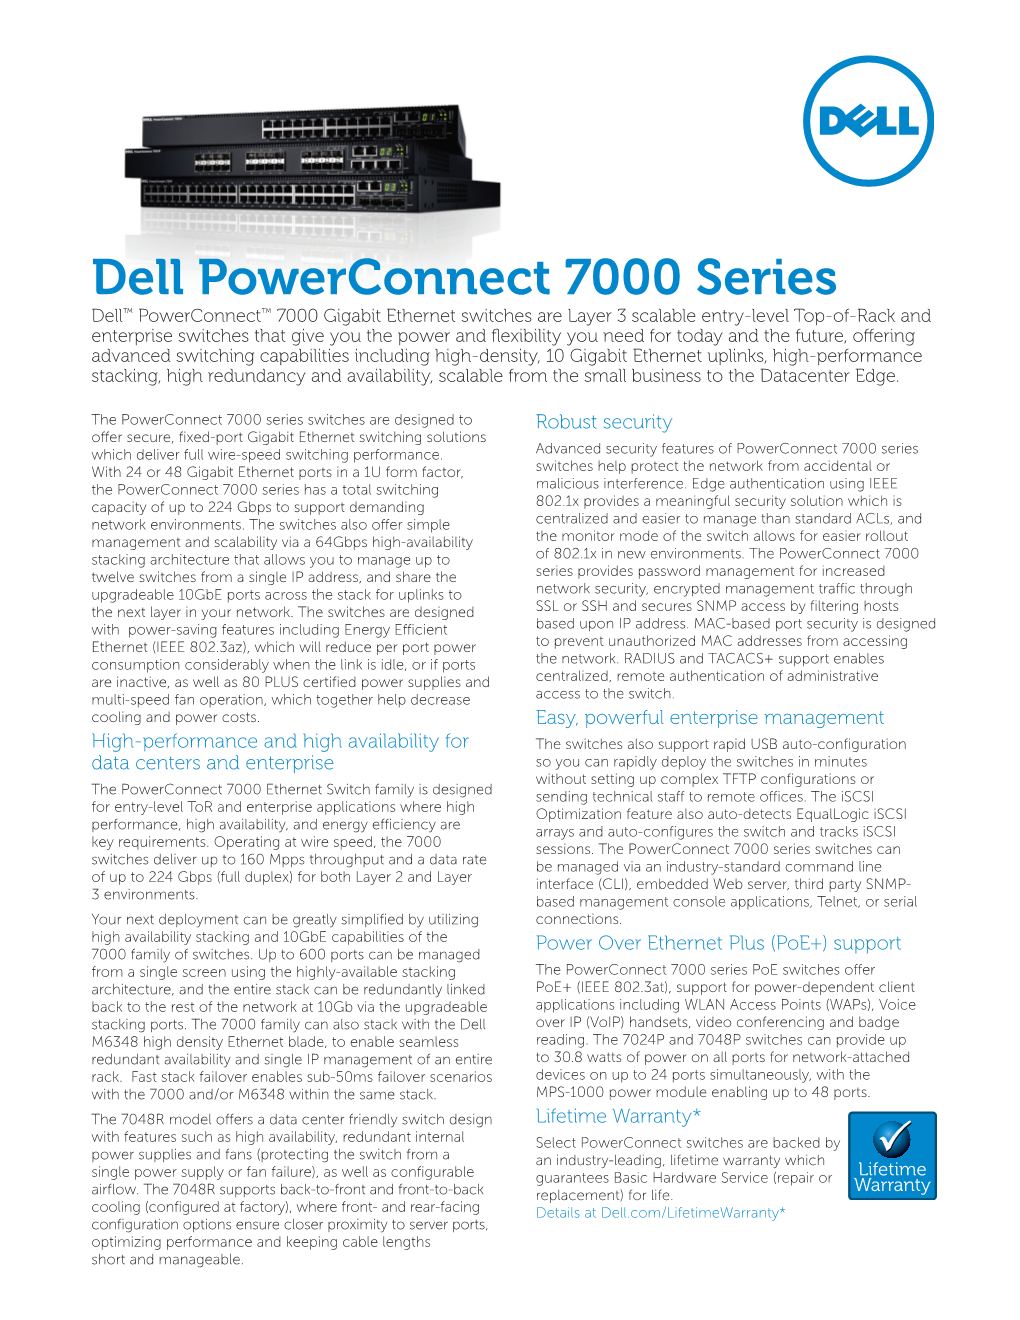 Dell Powerconnect 7000 Series